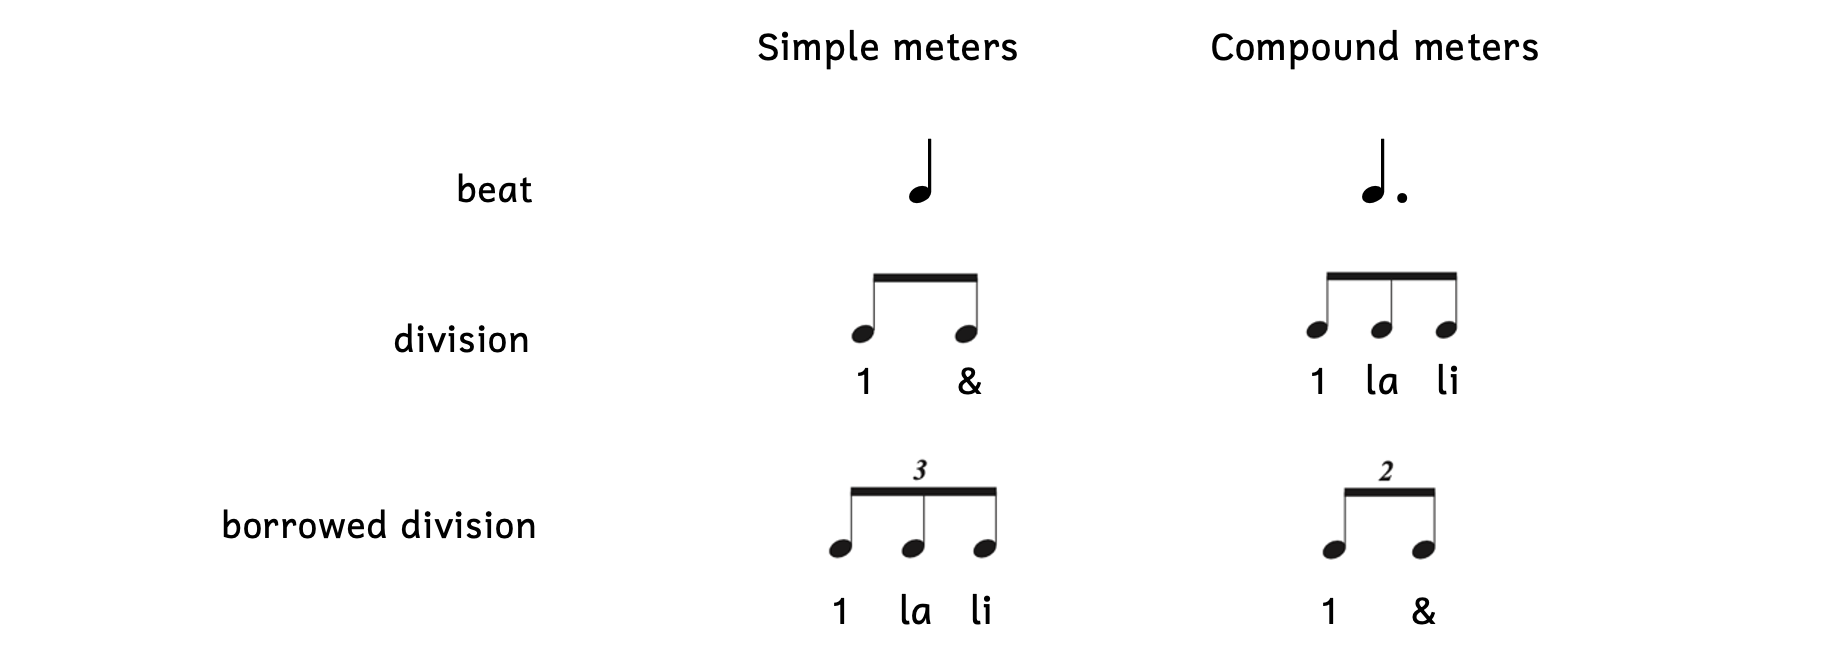 Two columns show simple meters and compound meters. Three rows show the beat, division, and borrowed division. Counts are added to the division and borrowed division.